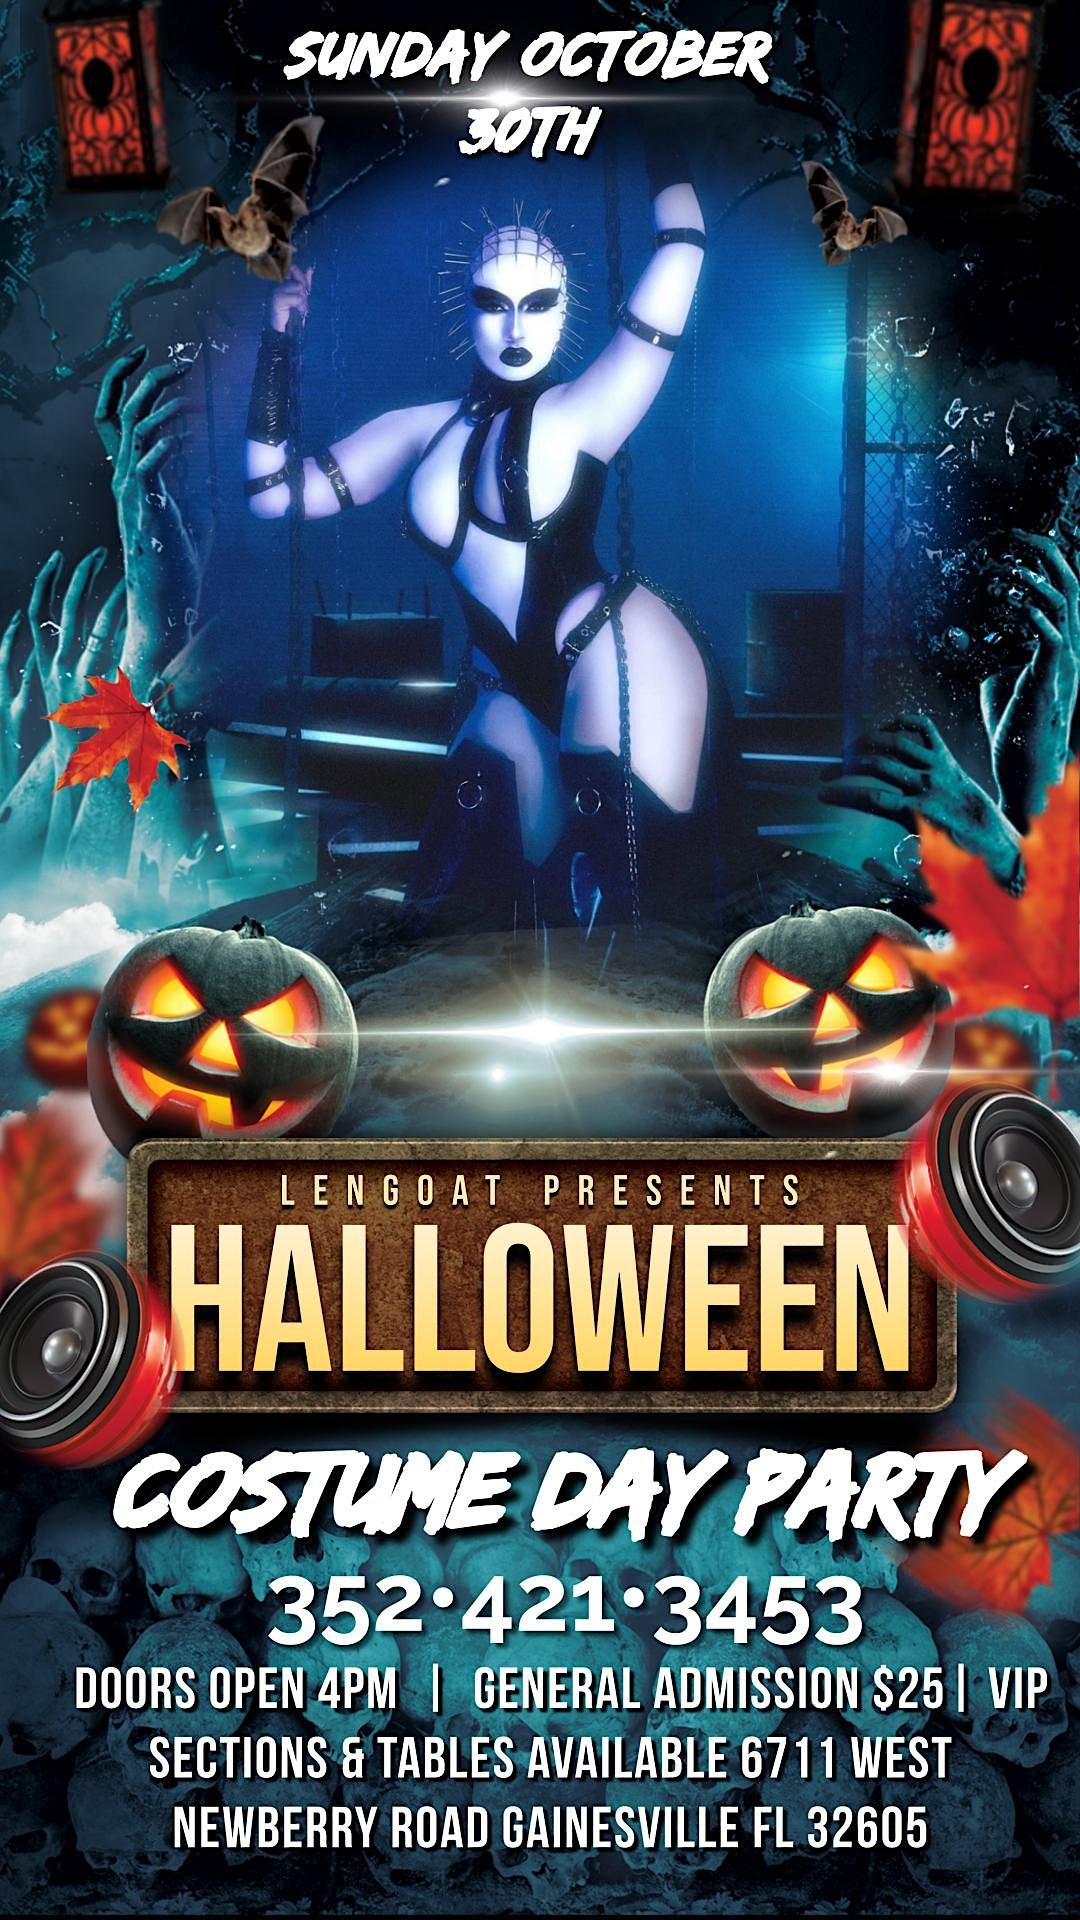 Halloween Costume Day Party
Sun Oct 30, 4:00 PM - Sun Oct 30, 10:00 PM
in 10 days